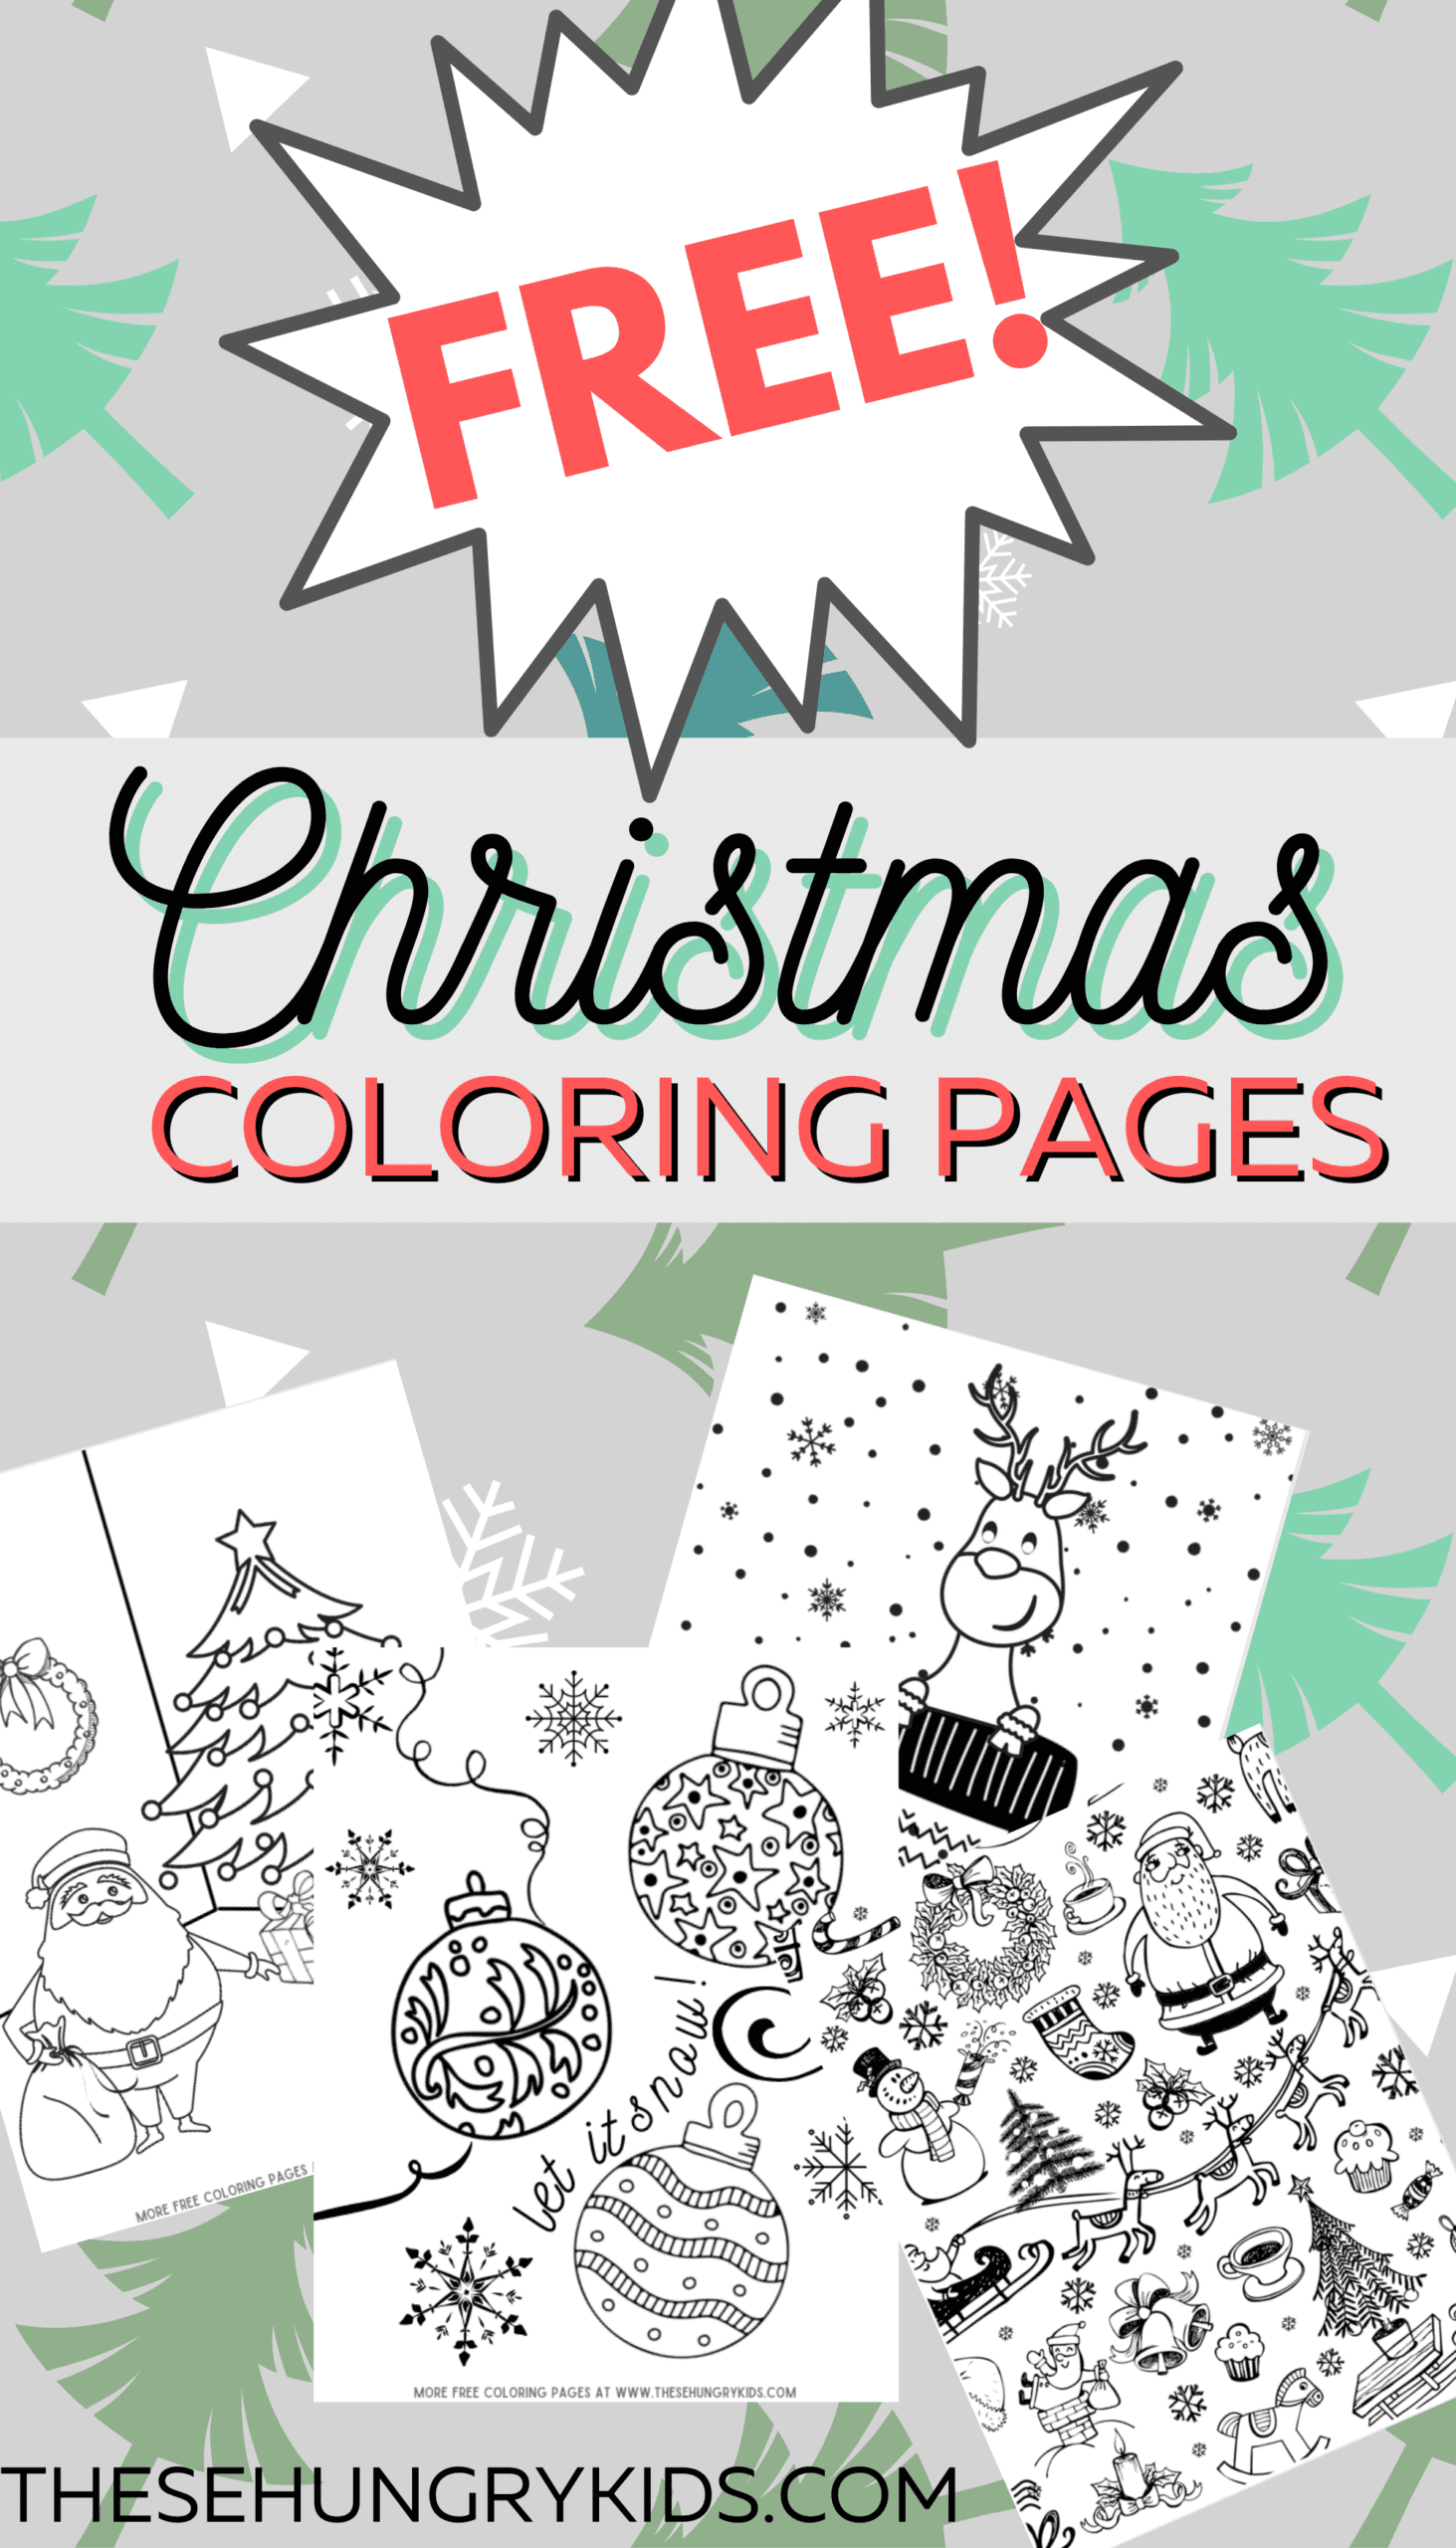 FREE DOWNLOAD Christmas Coloring Pages - These Hungry Kids